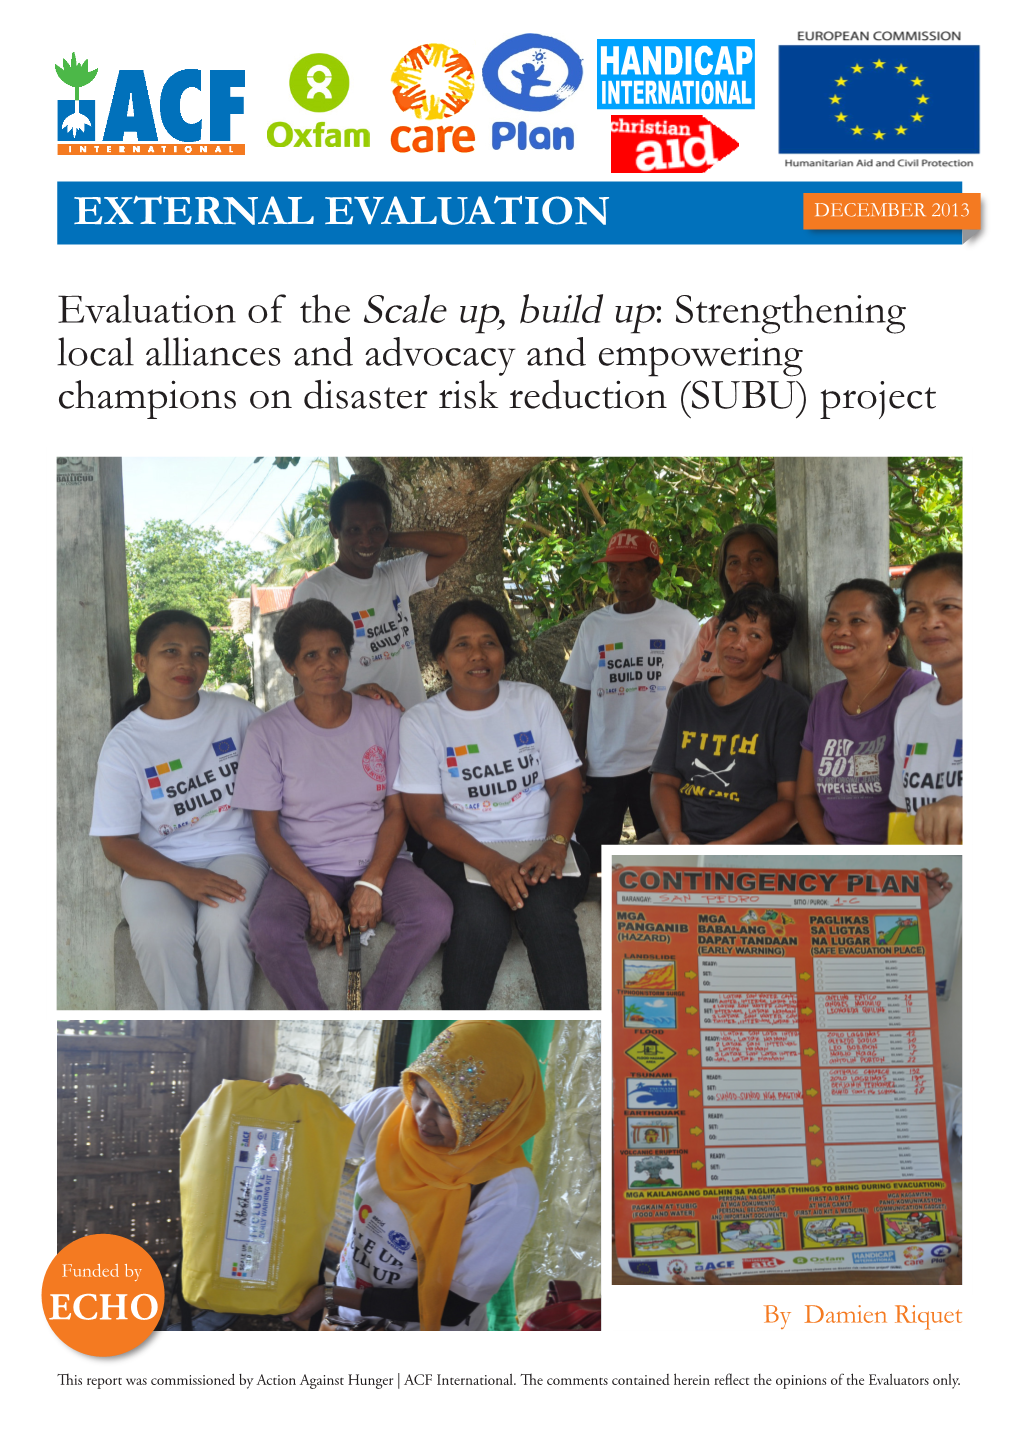 Evaluation of the Scale Up, Build Up: Strengthening Local Alliances and Advocacy and Empowering Champions on Disaster Risk Reduction (SUBU) Project